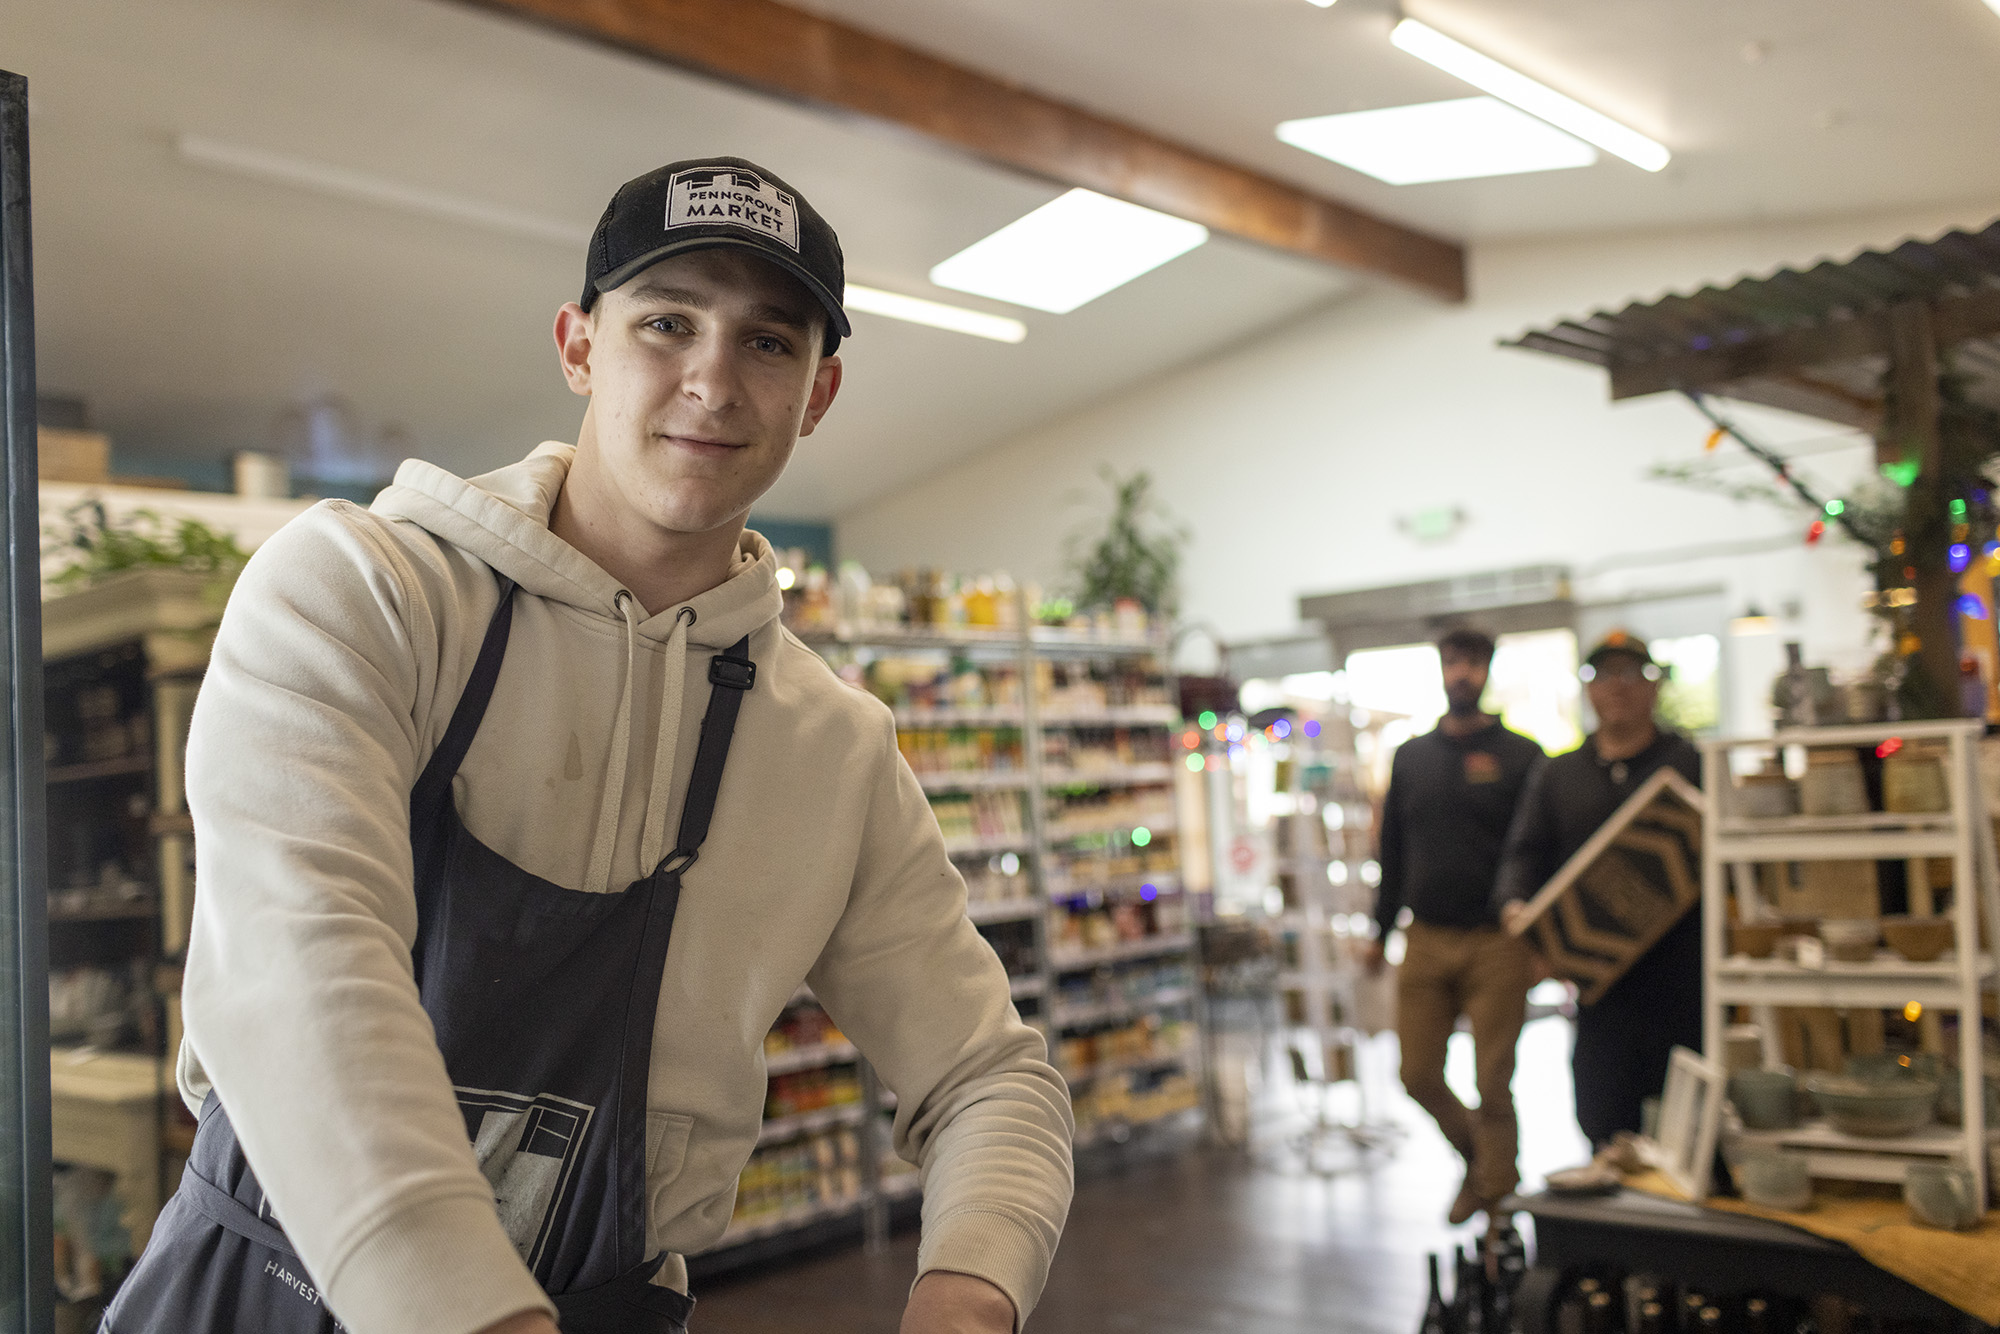 Penngrove Market employee smiling for camera while restocking groceries.